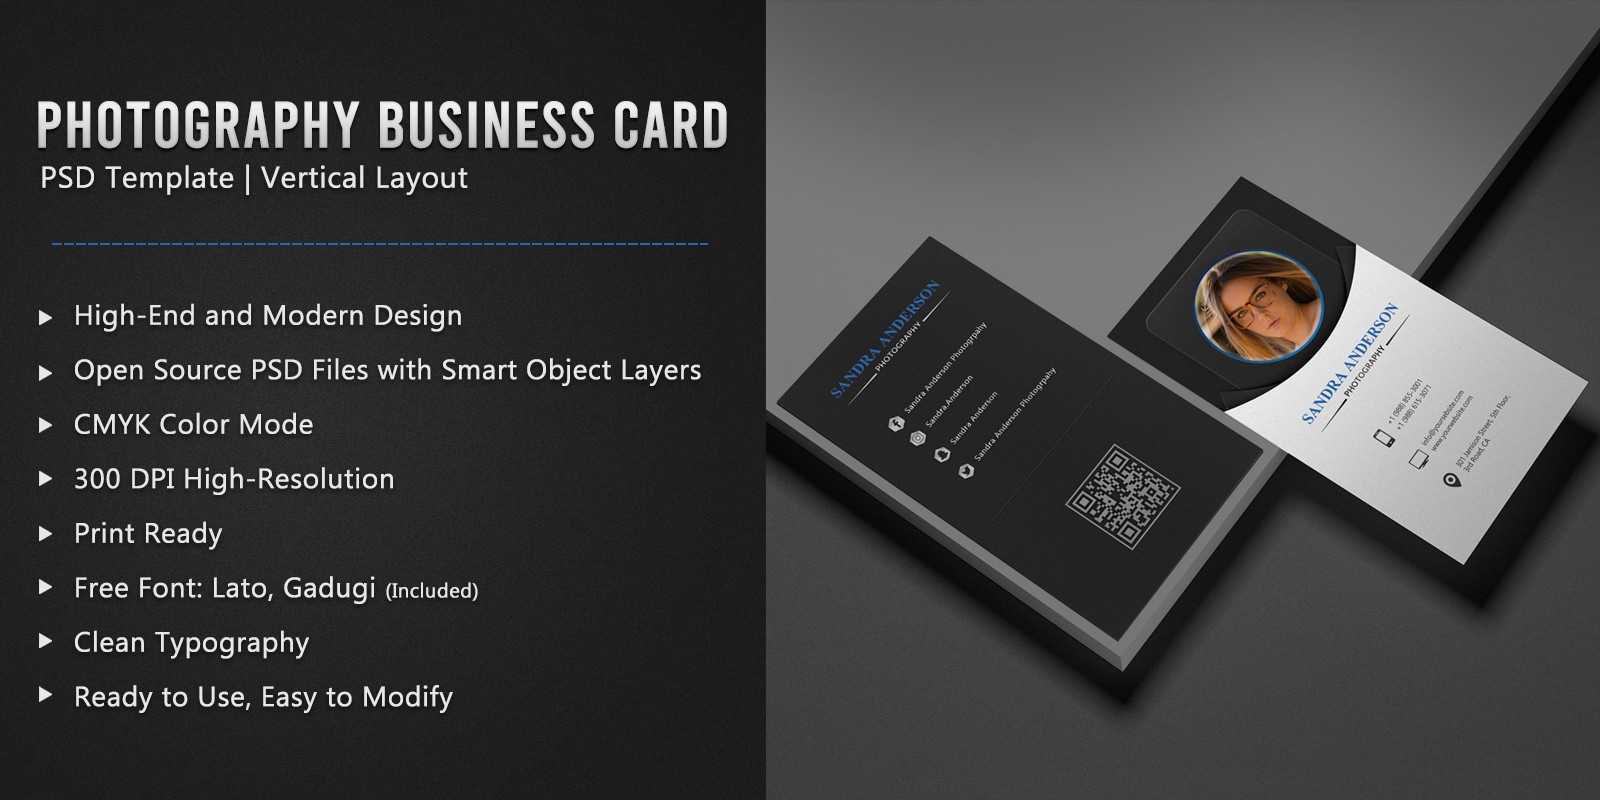 035 Free Photography Business Card Templates Photoshop With Regard To Photography Business Card Template Photoshop